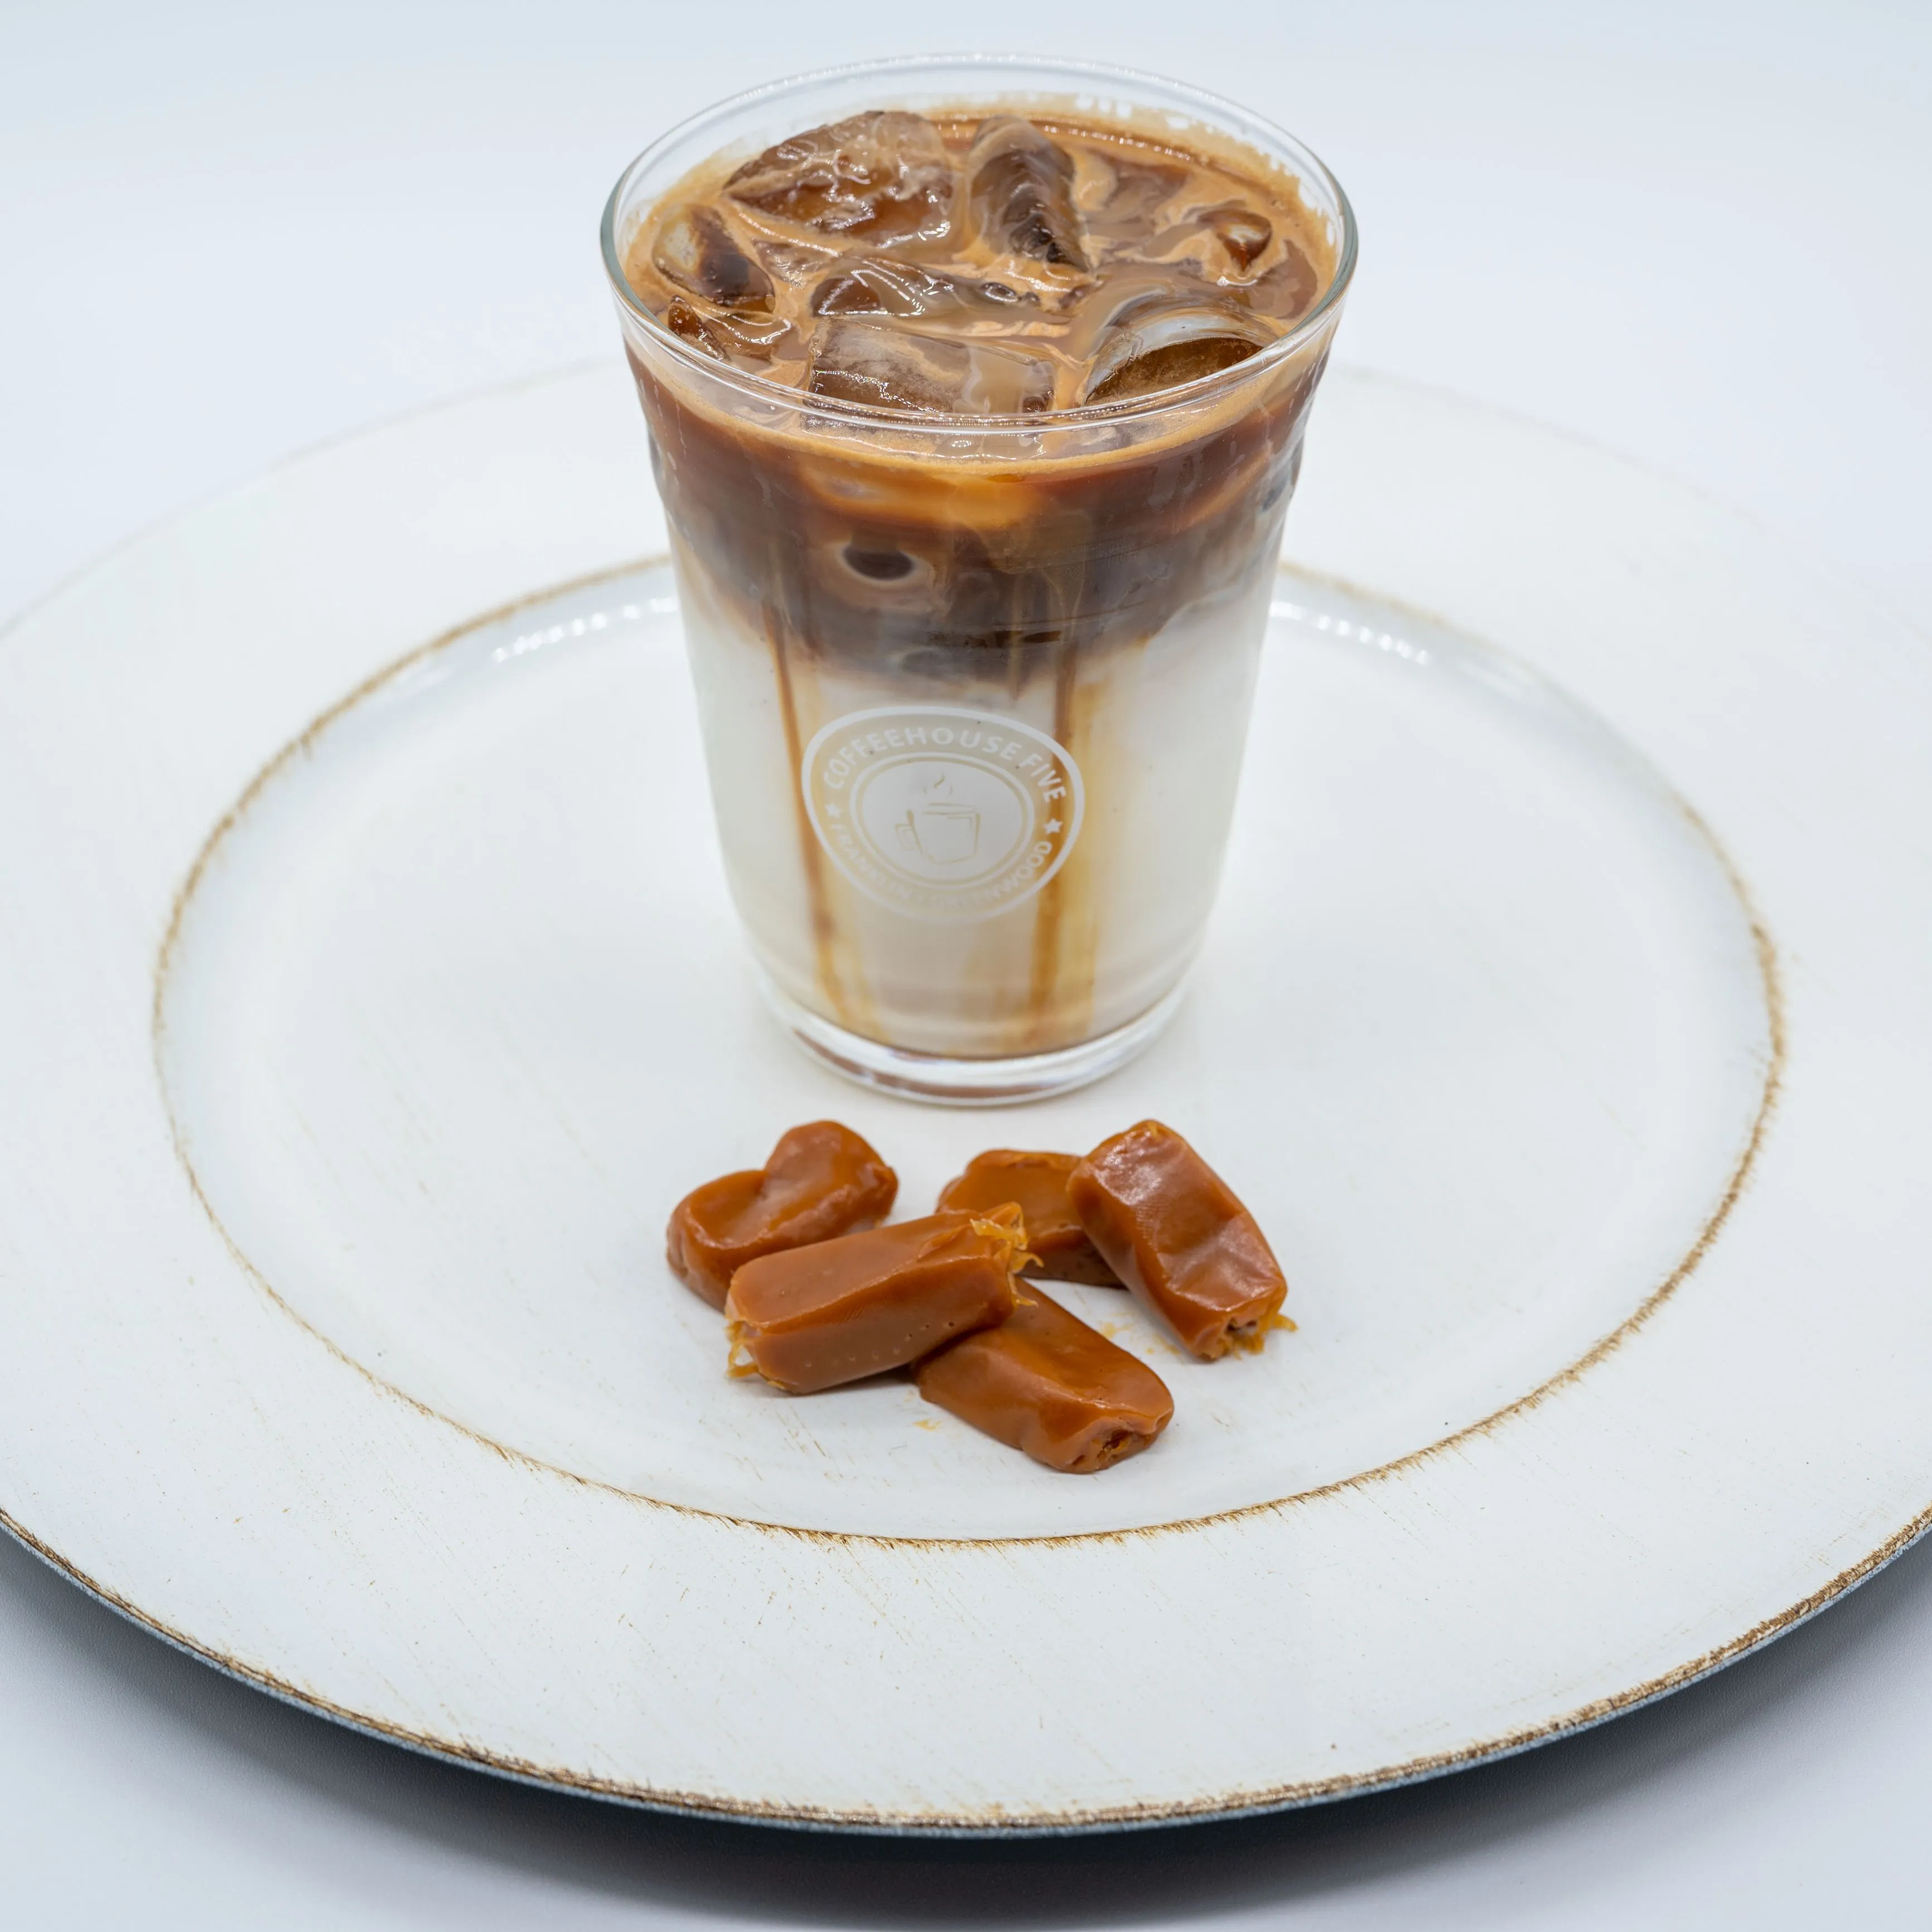 Iced caramel macchiato in a clear glass on a ceramic plate with caramel candies.